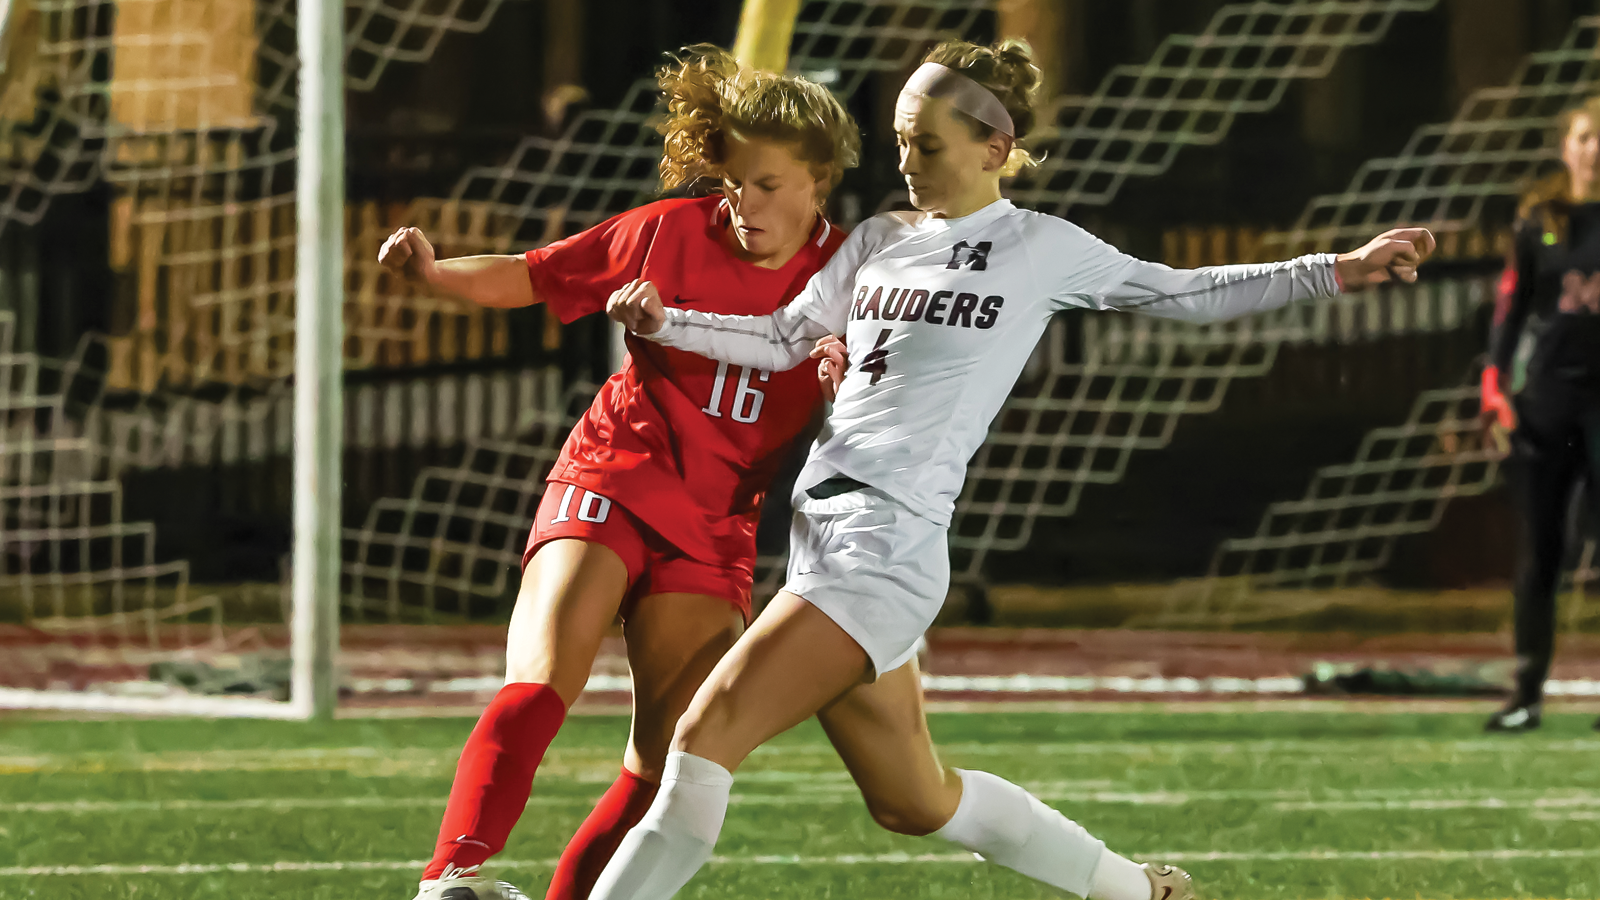 Action photo of McMaster women's soccer player Alena Spehar competing with an opposing player for the ball